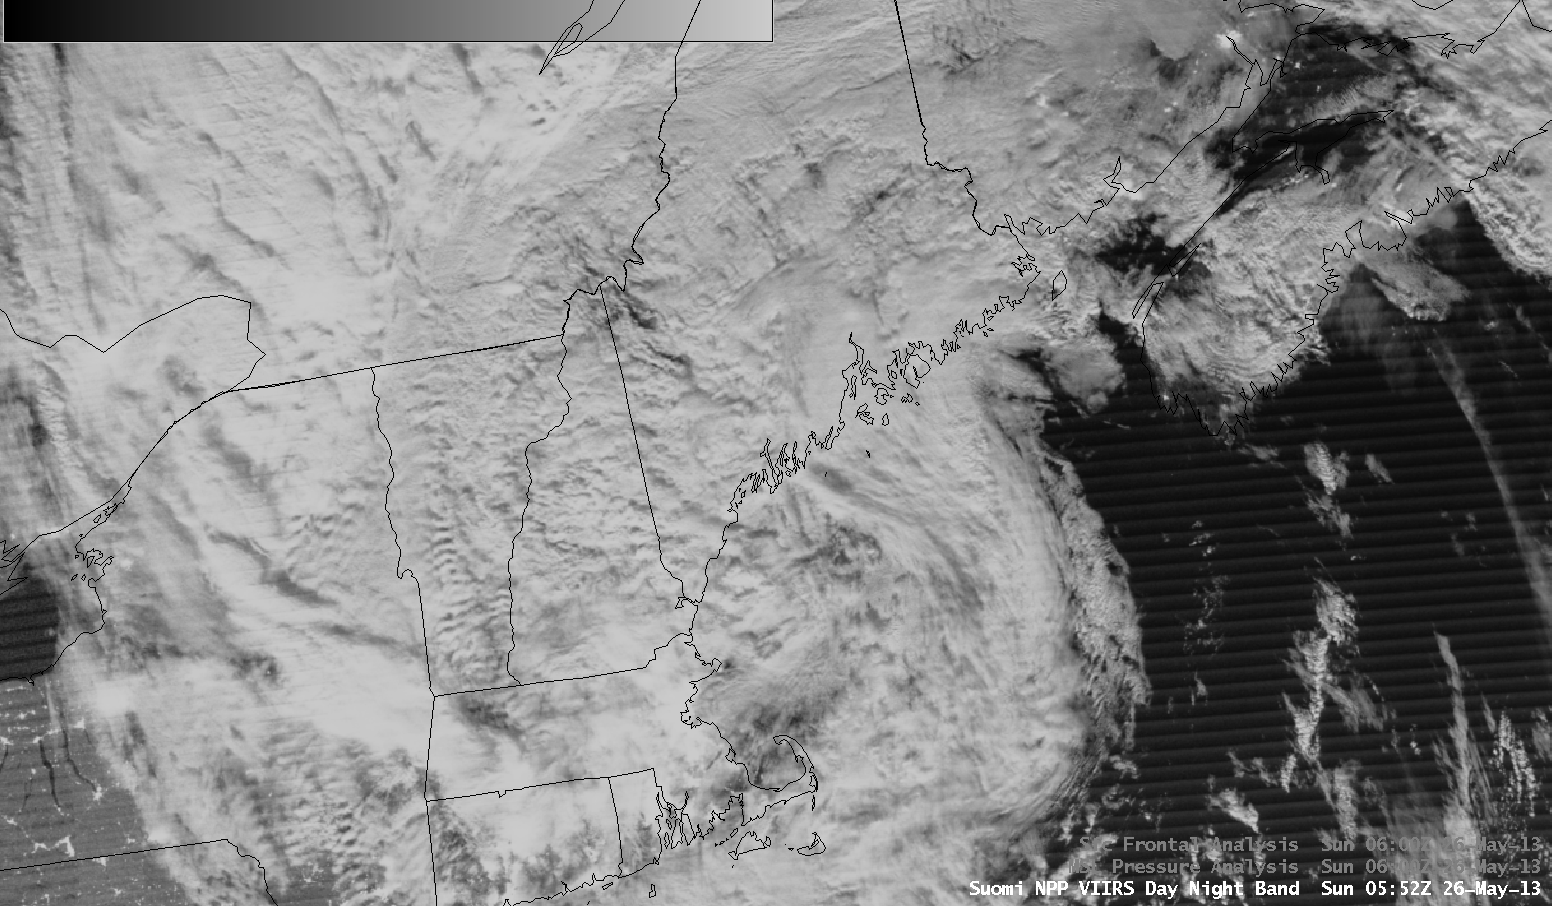 An animation flips between a Day Night Band image of the storm over New England and an infrared image, showing the location of clouds and the intensity of different areas of the storm.